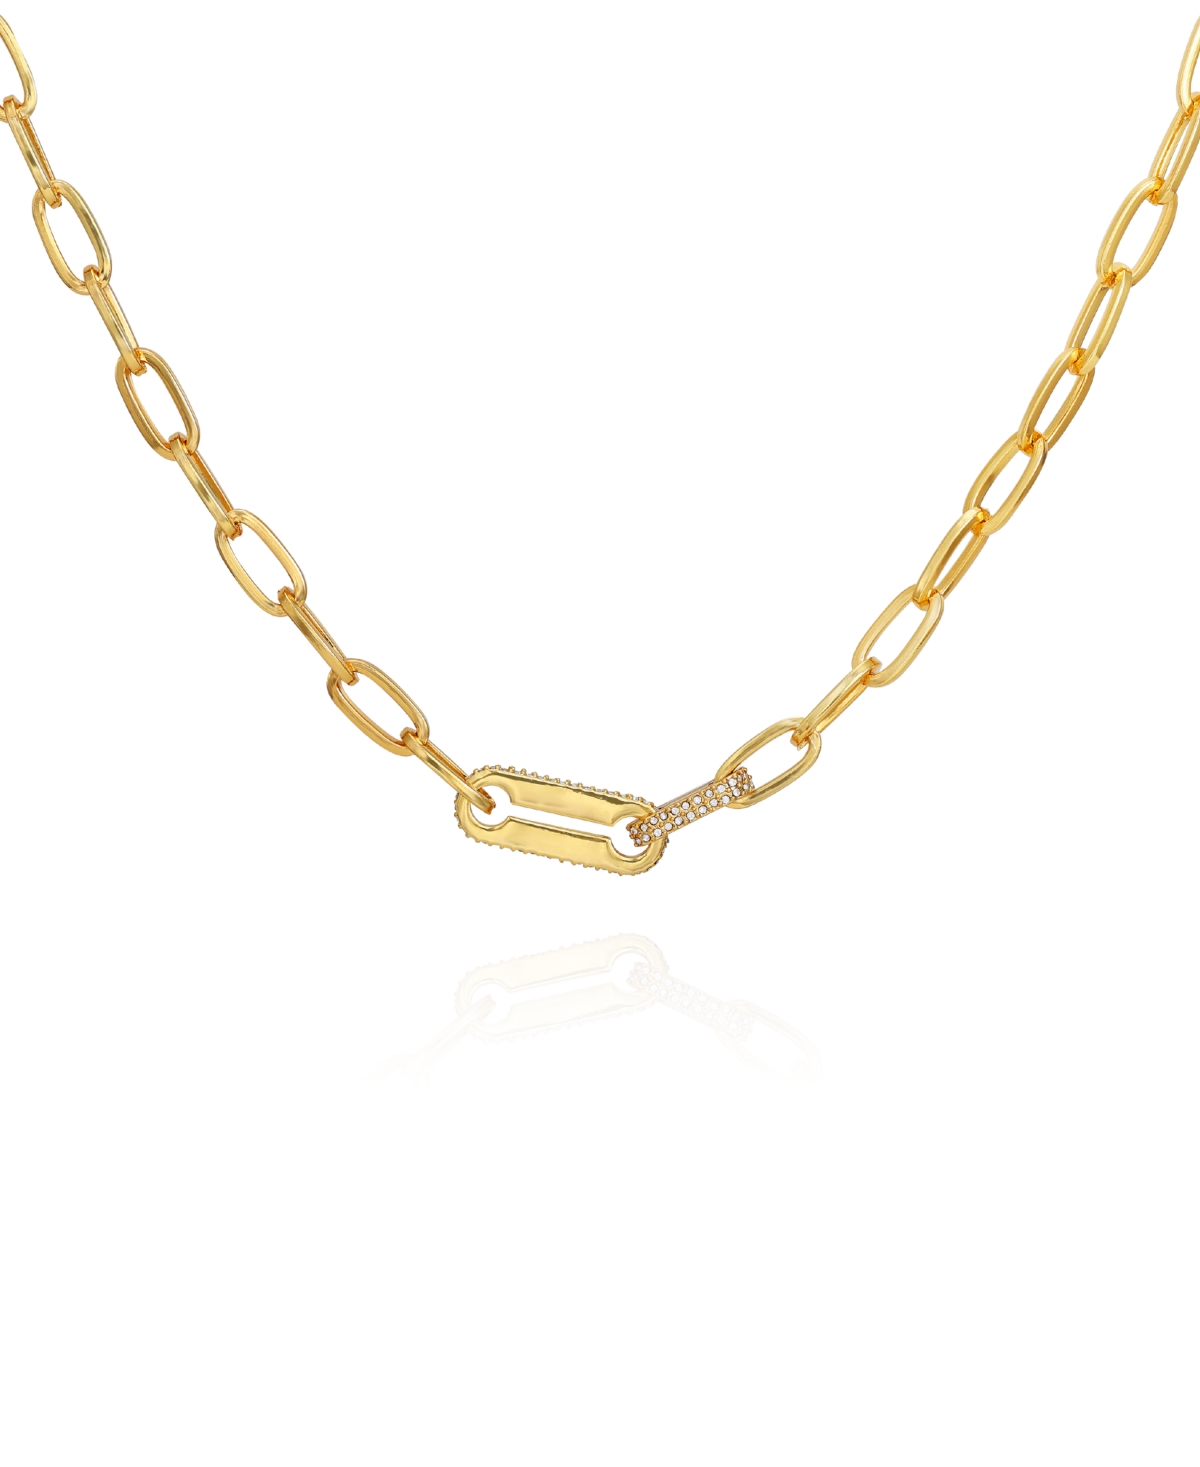 Vince Camuto Gold-tone Link Chain Necklace, 18" + 2" Extender